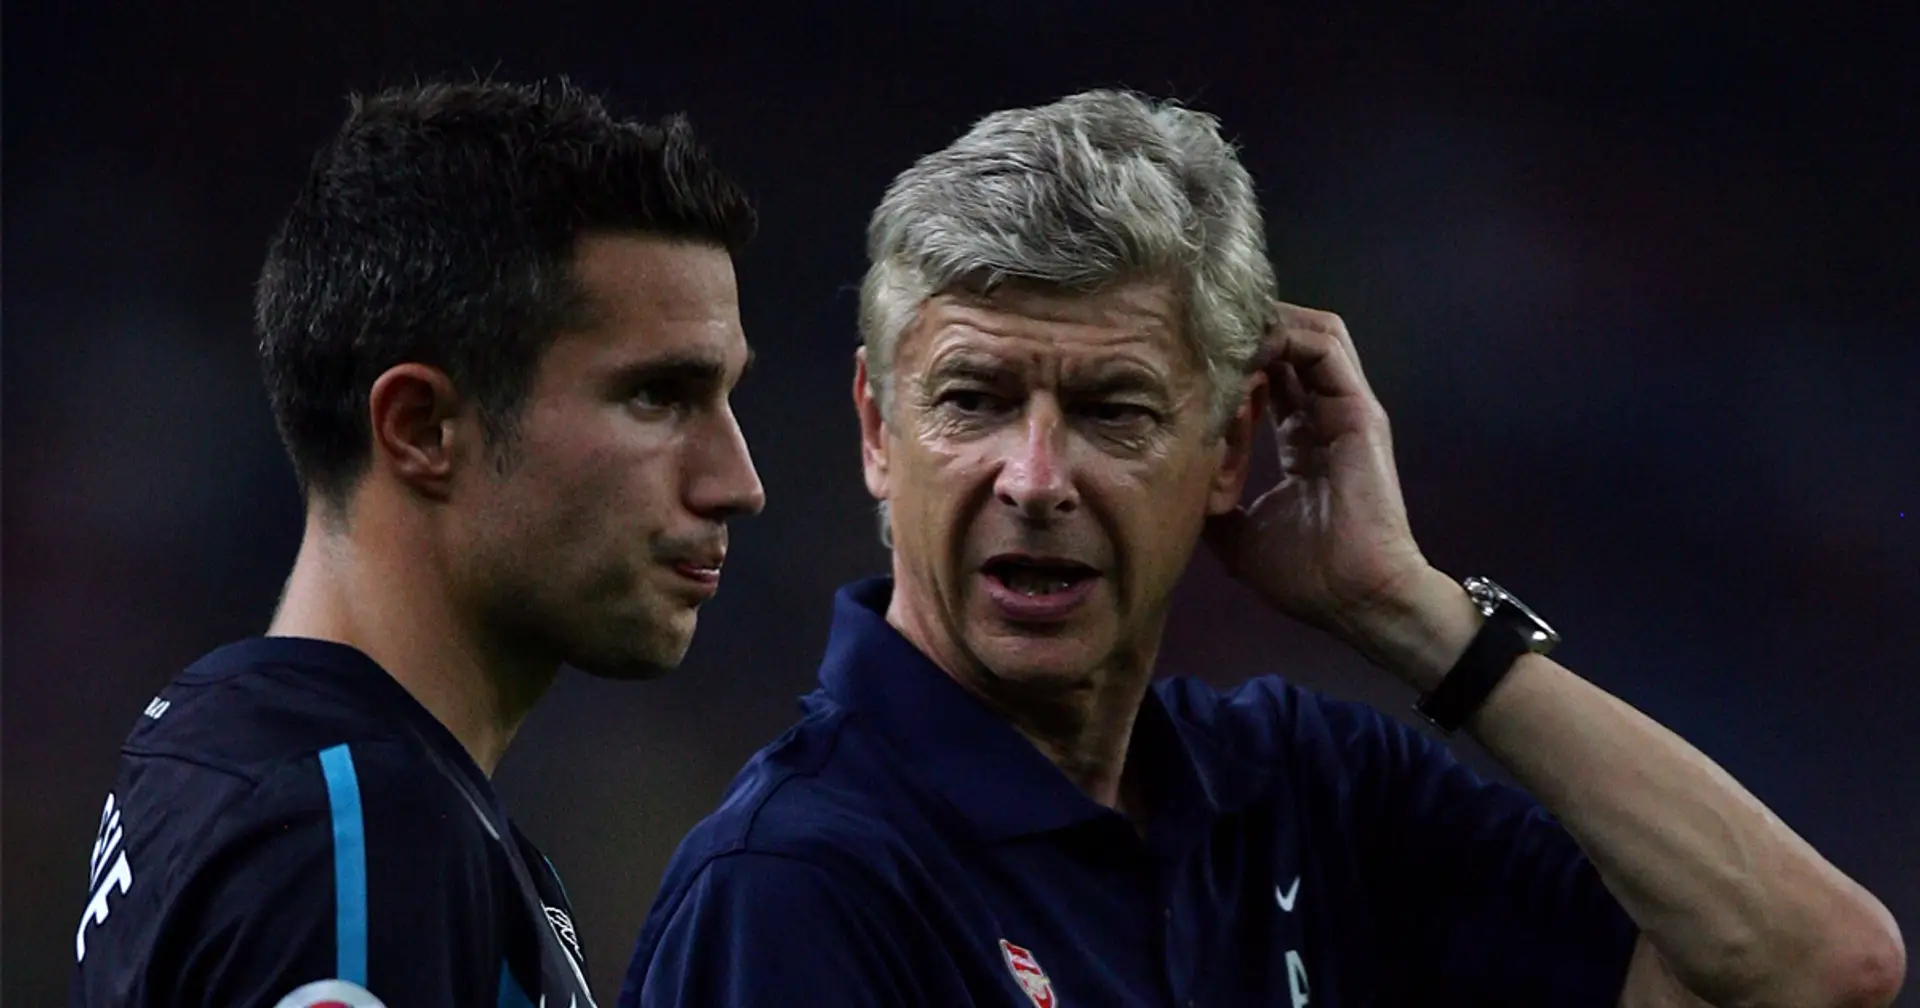 Wenger reveals reason why he rejected Van Persie's plea to return to Arsenal after 3 years at United